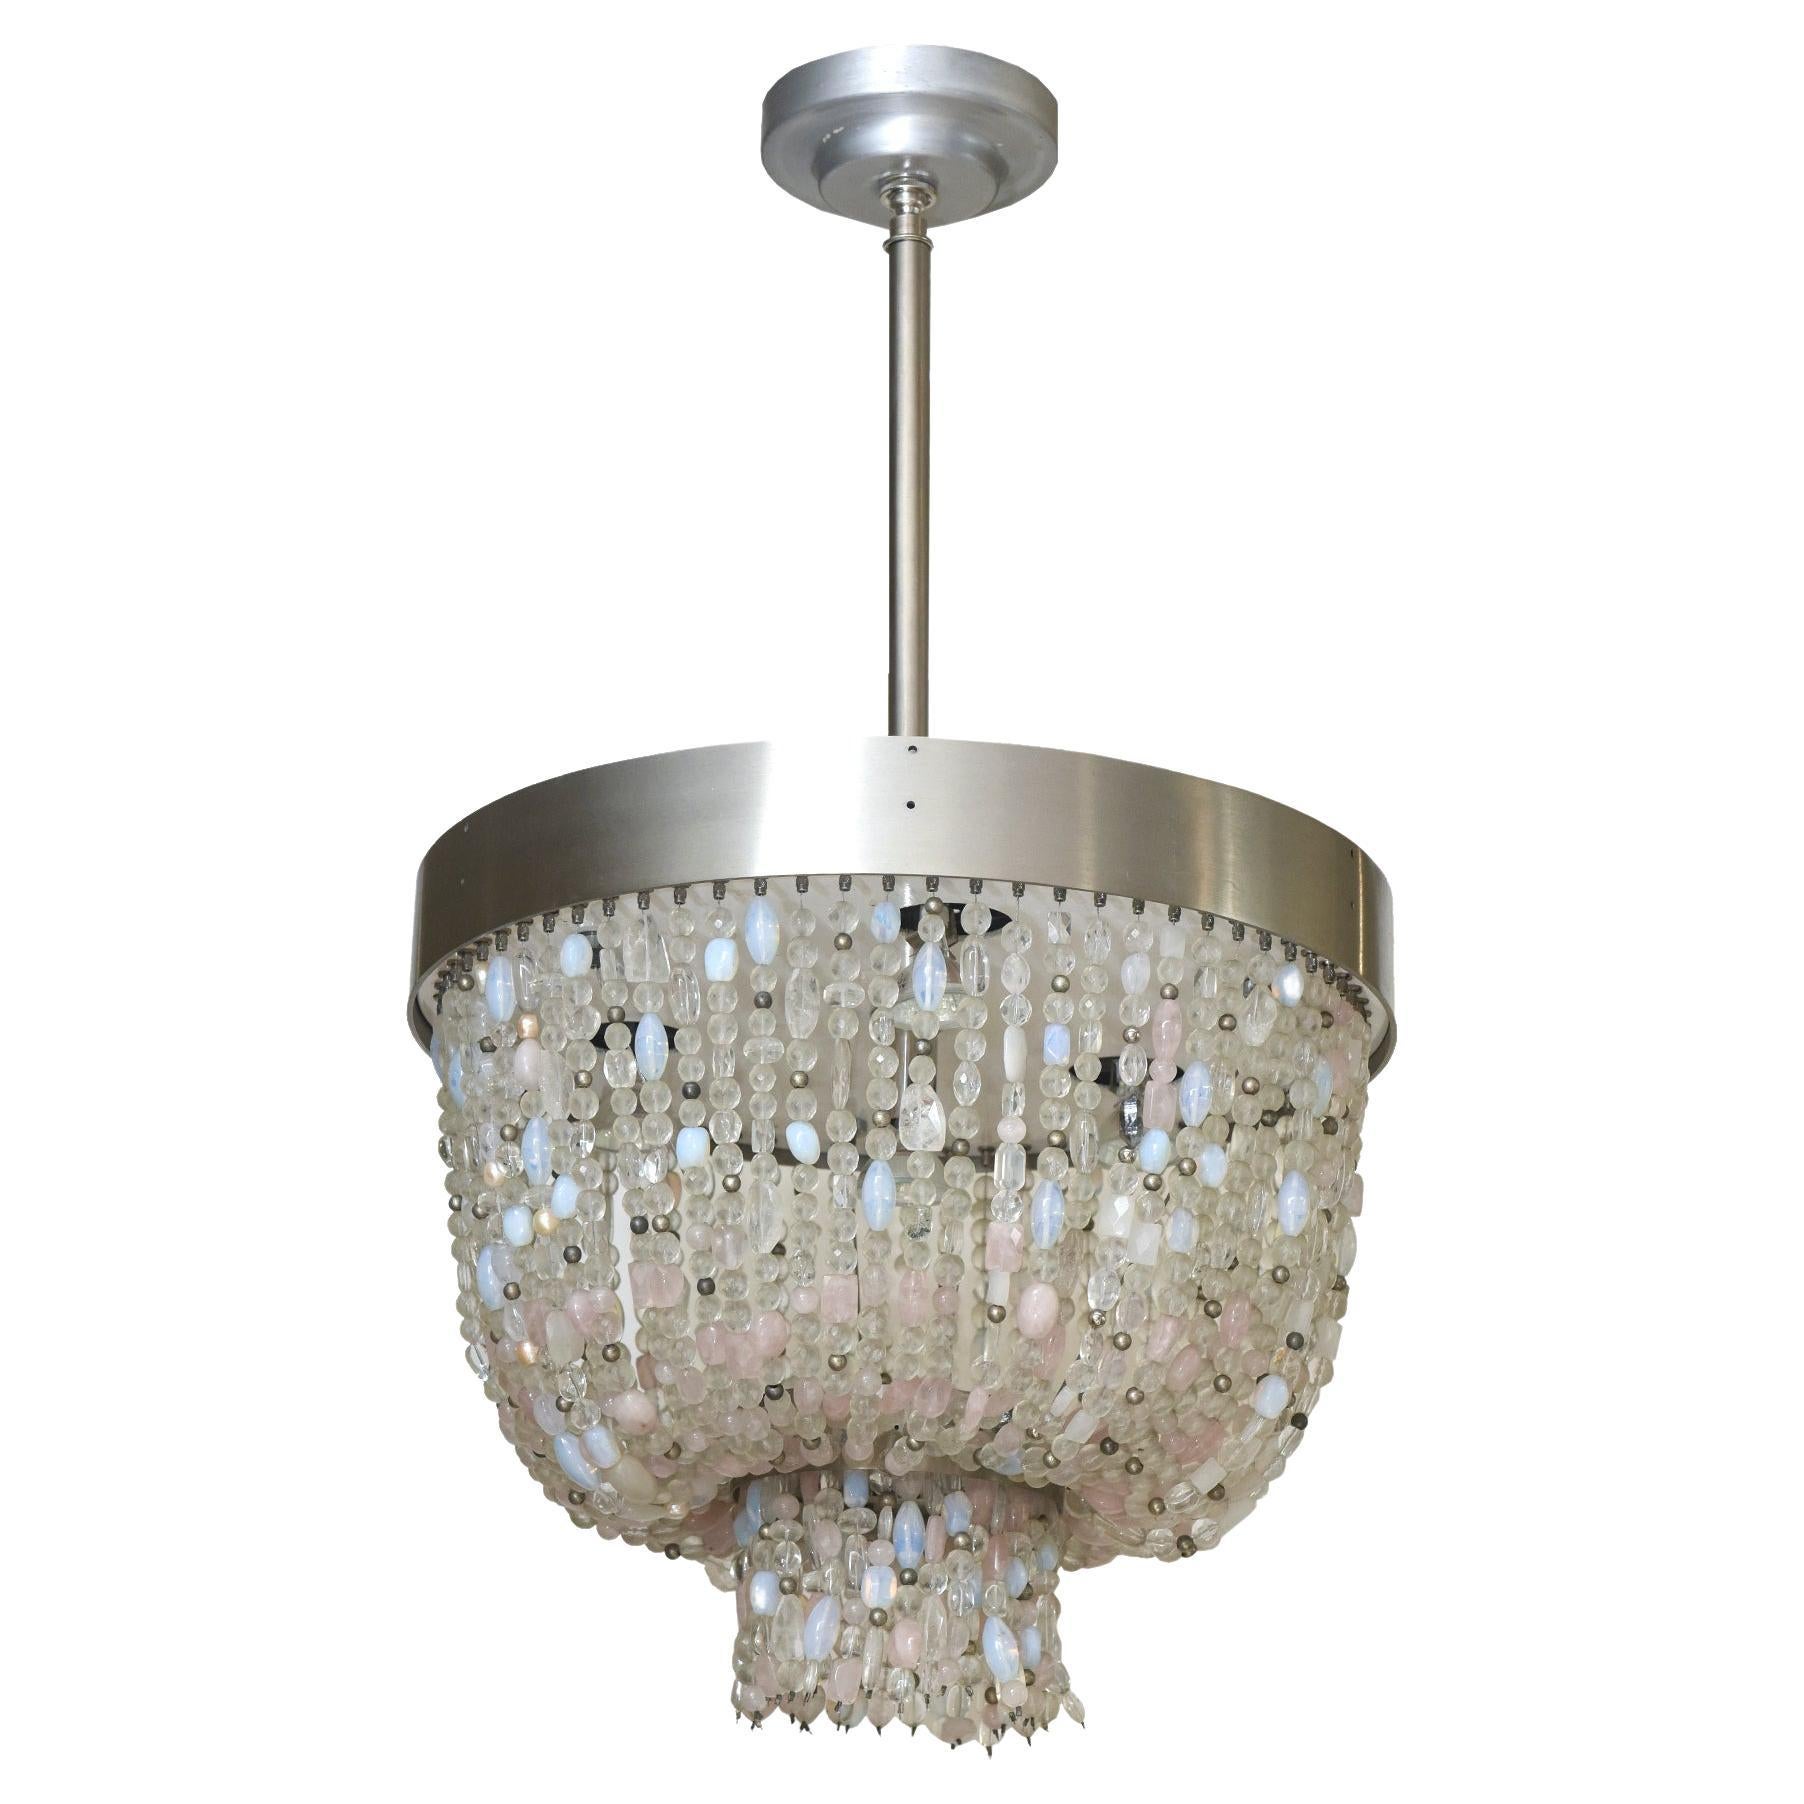  Quartz and Stainless Steel Two Tier Pink Lavaliere Chandelier by Thomas Fuchs